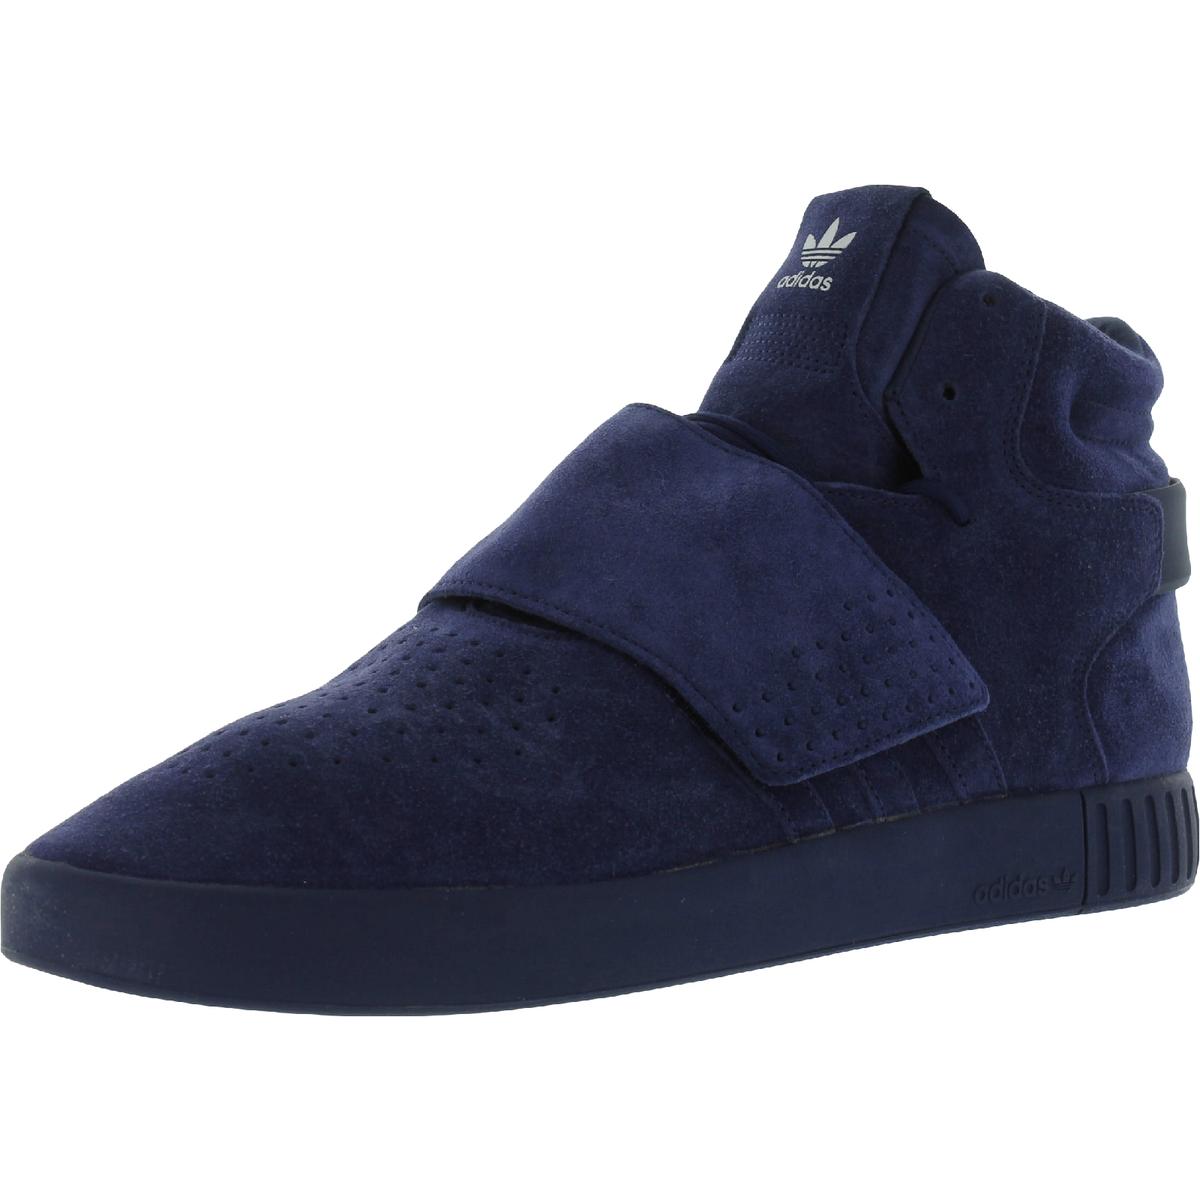 Adidas Tubular Invader Strap Mens Suede High Top Casual and Fashion Sneakers